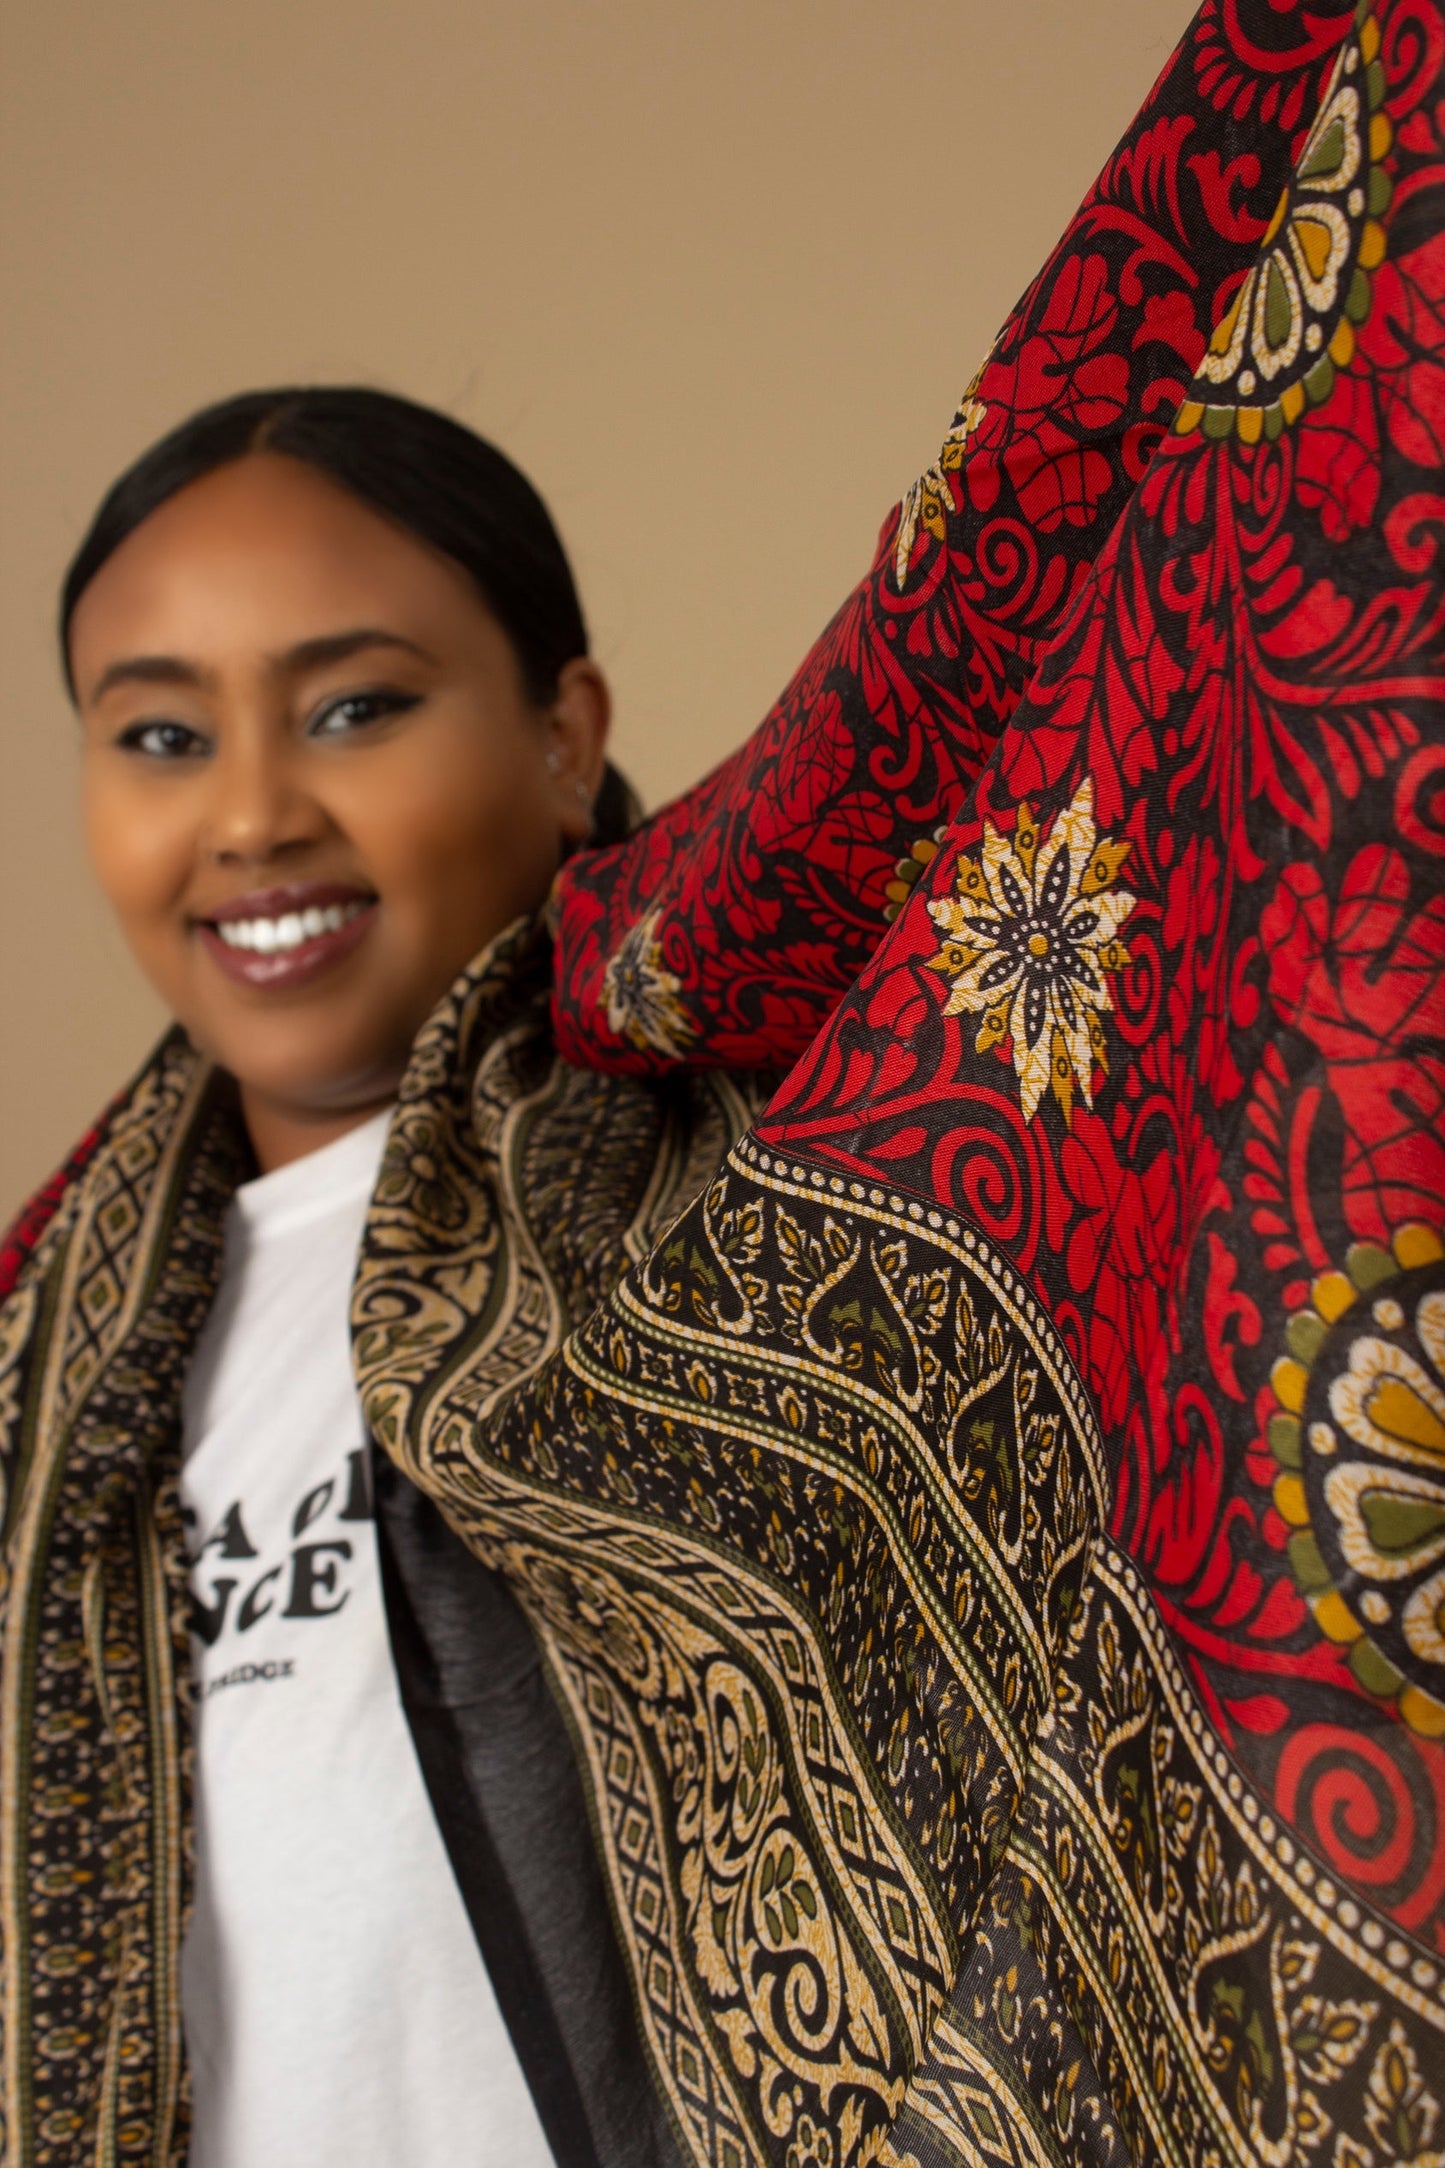 The one-sized Red Dashiki Chiffon Scarf is a vibrant floral African Print in an extremely flattering, red, gold and black African floral dashiki Print pattern. The Red Dashiki Chiffon Scarf is printed on a luxurious Chiffon that is ethically sourced, Designed in England Made in Nigeria. 